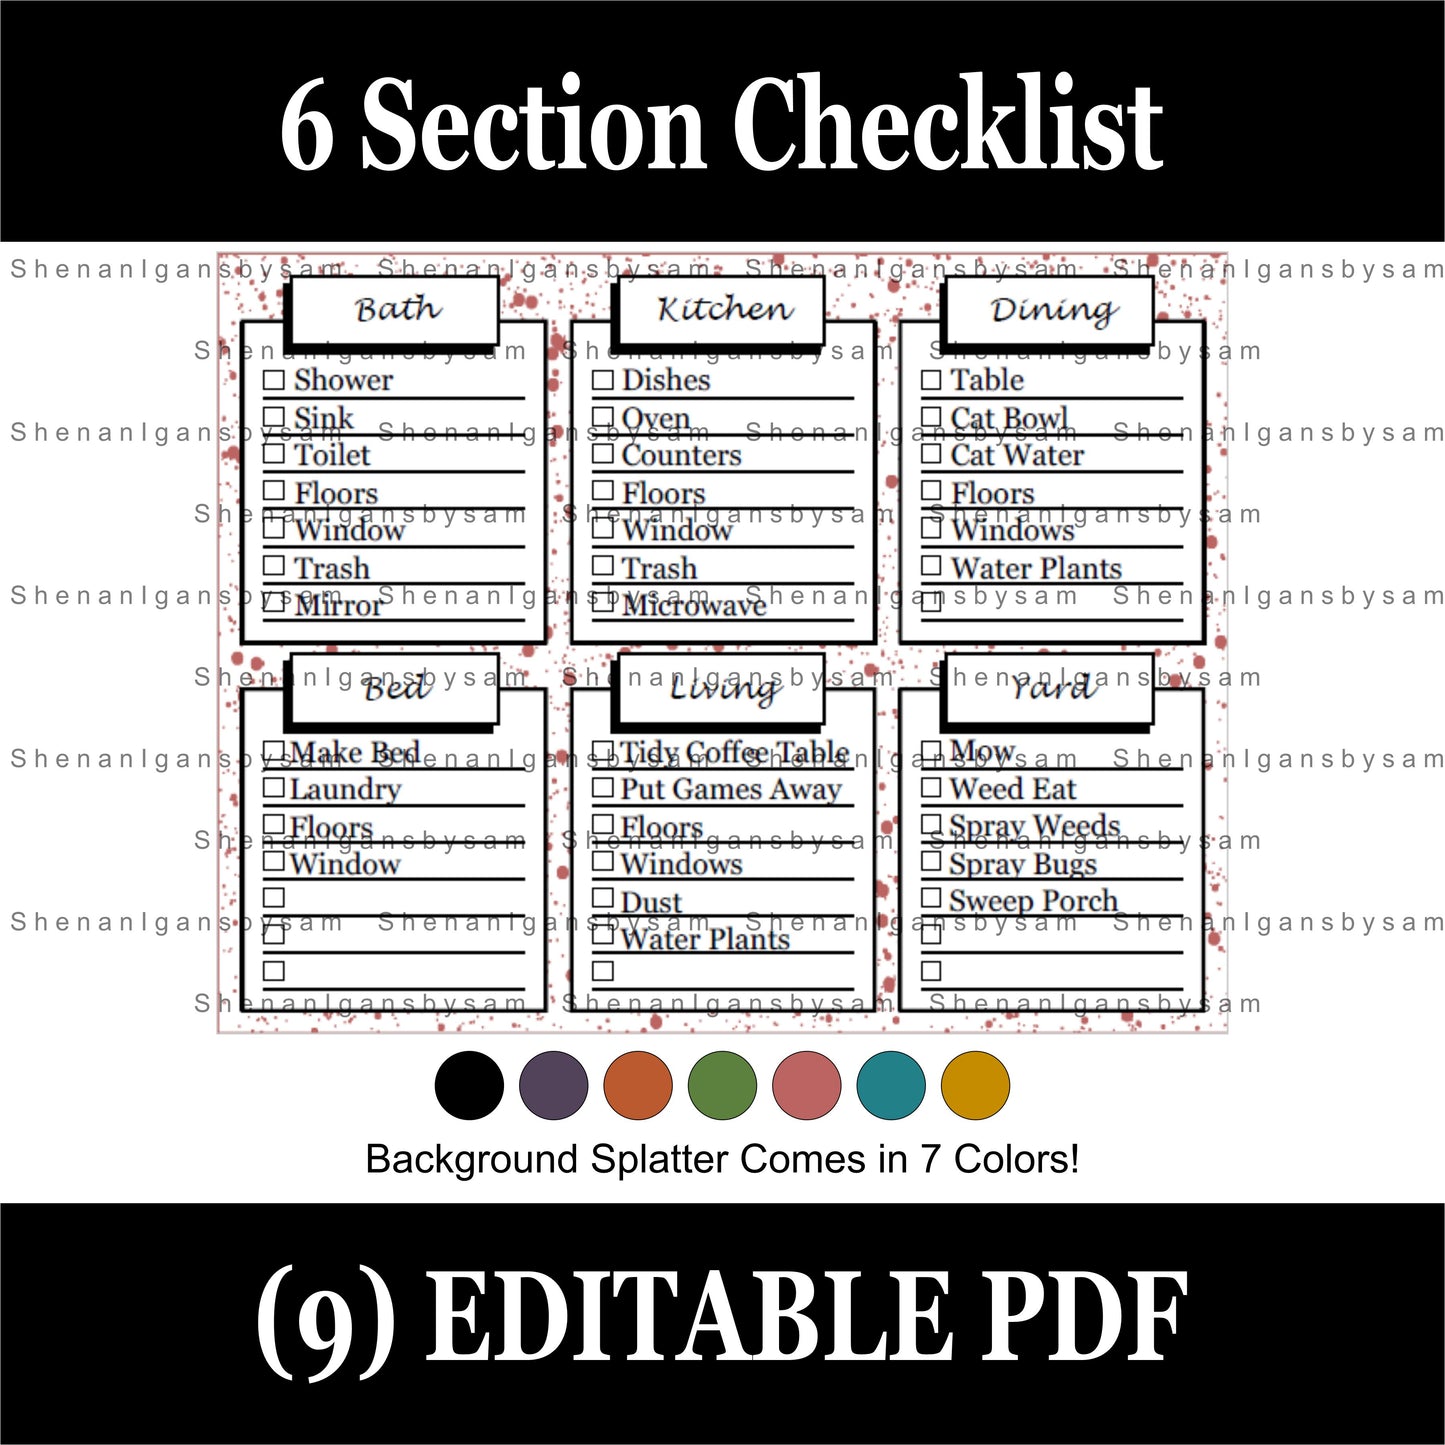 6 Section Checklist - To Do List - Chore List *DIGITAL DOWNLOAD*